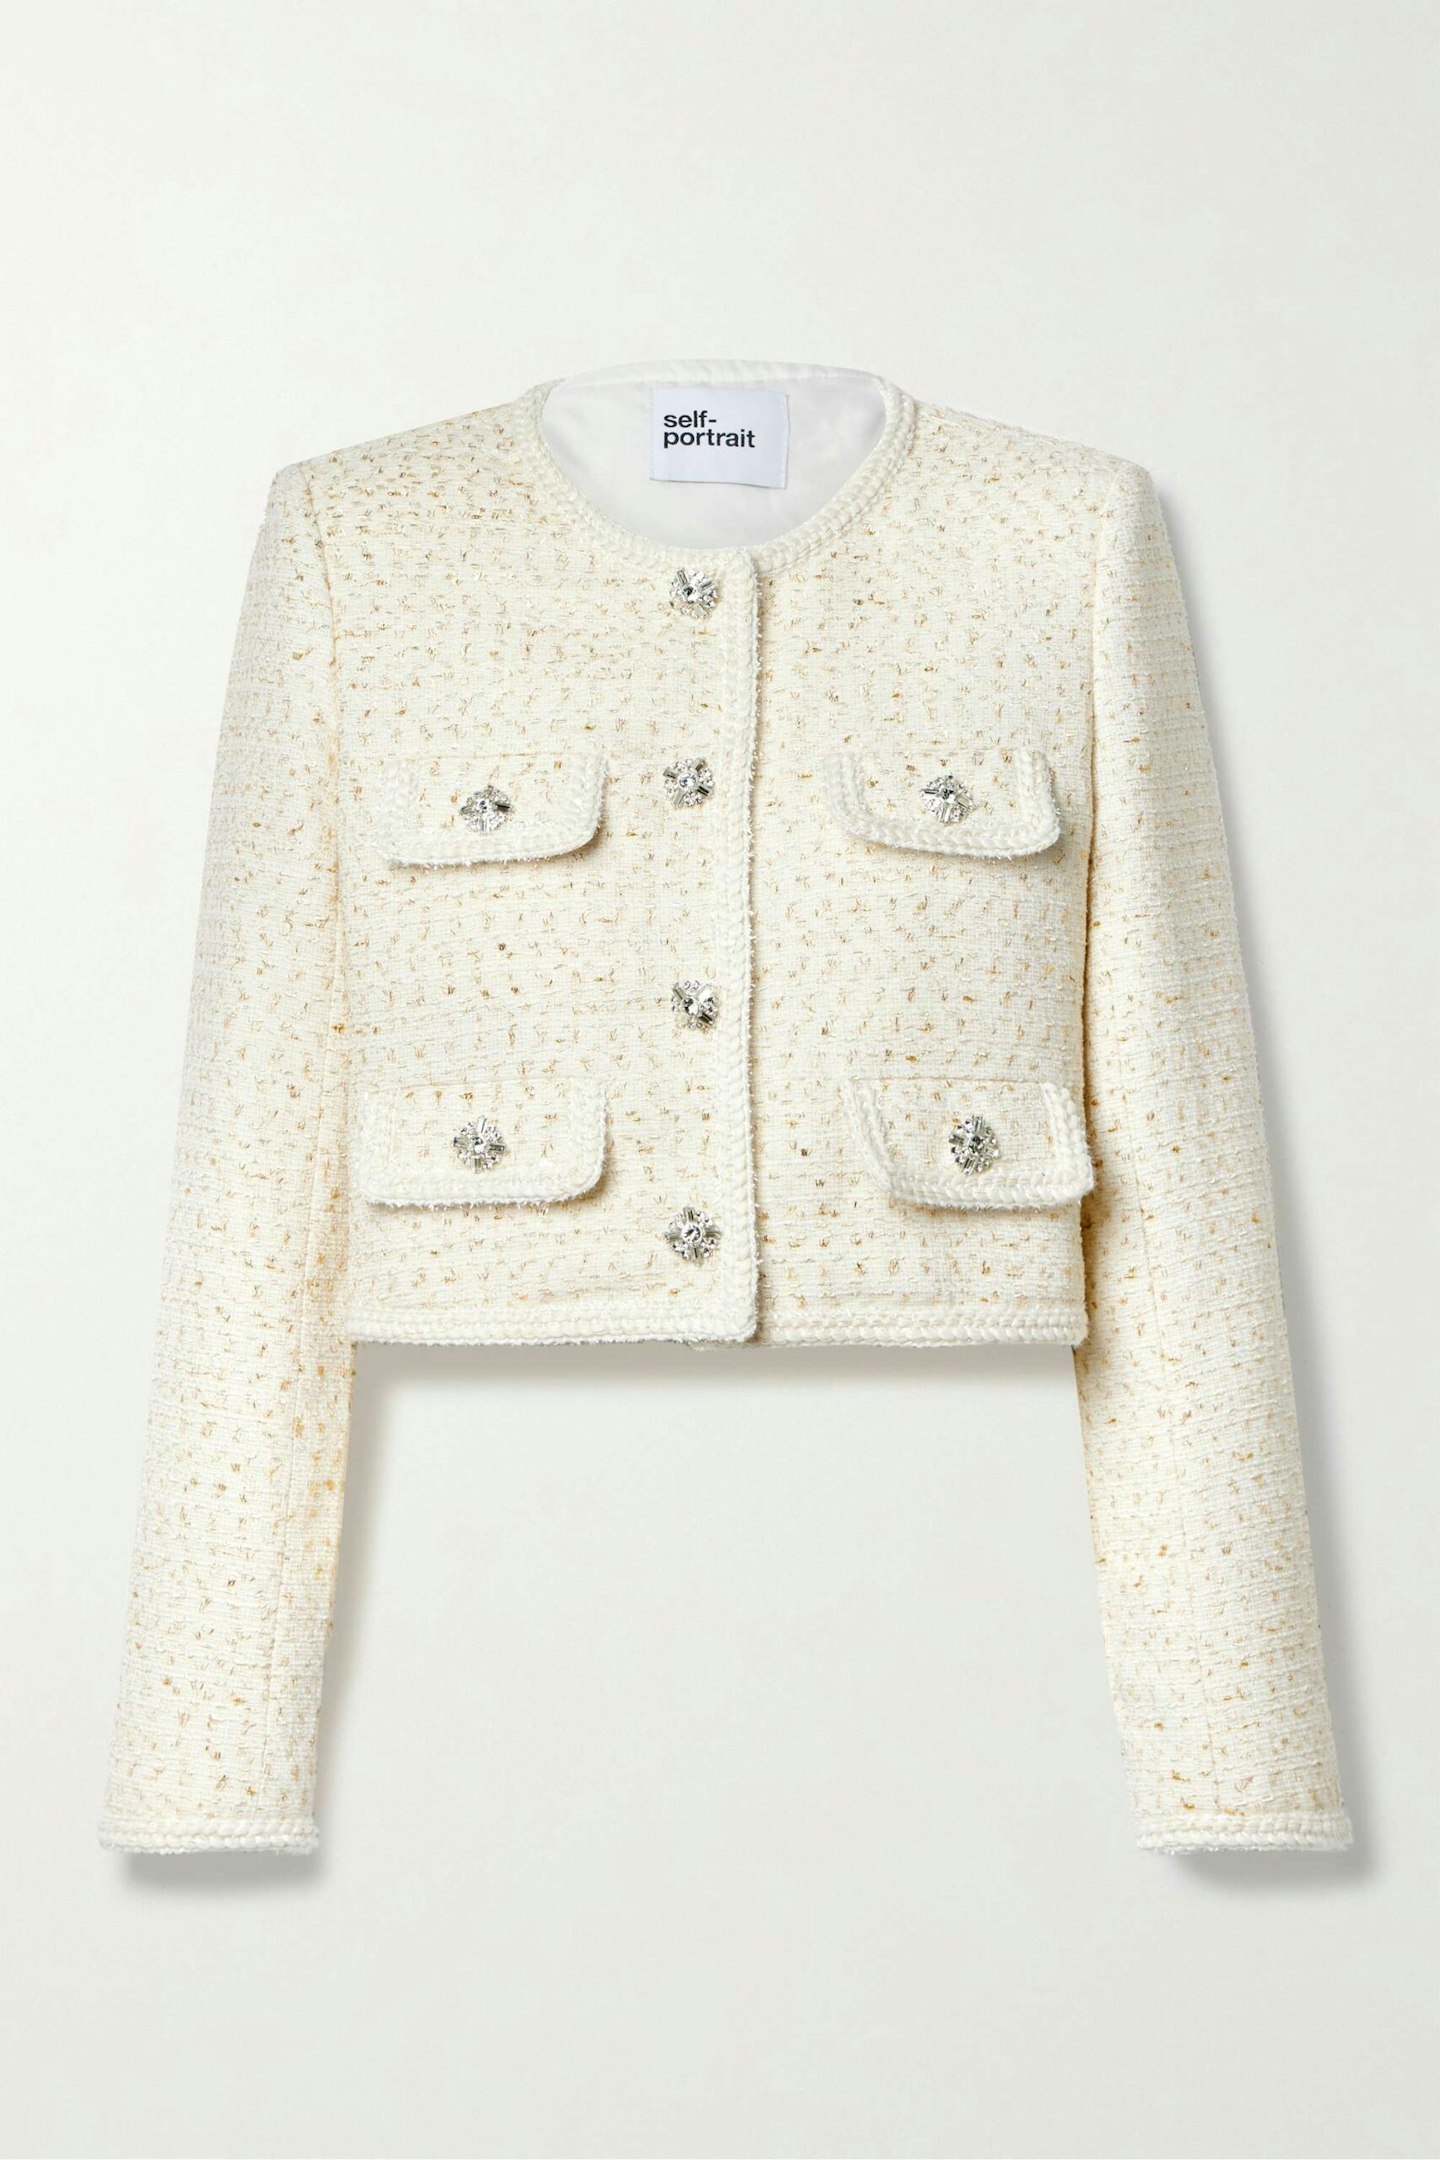 The Best Chanel Style Jackets To Buy Now